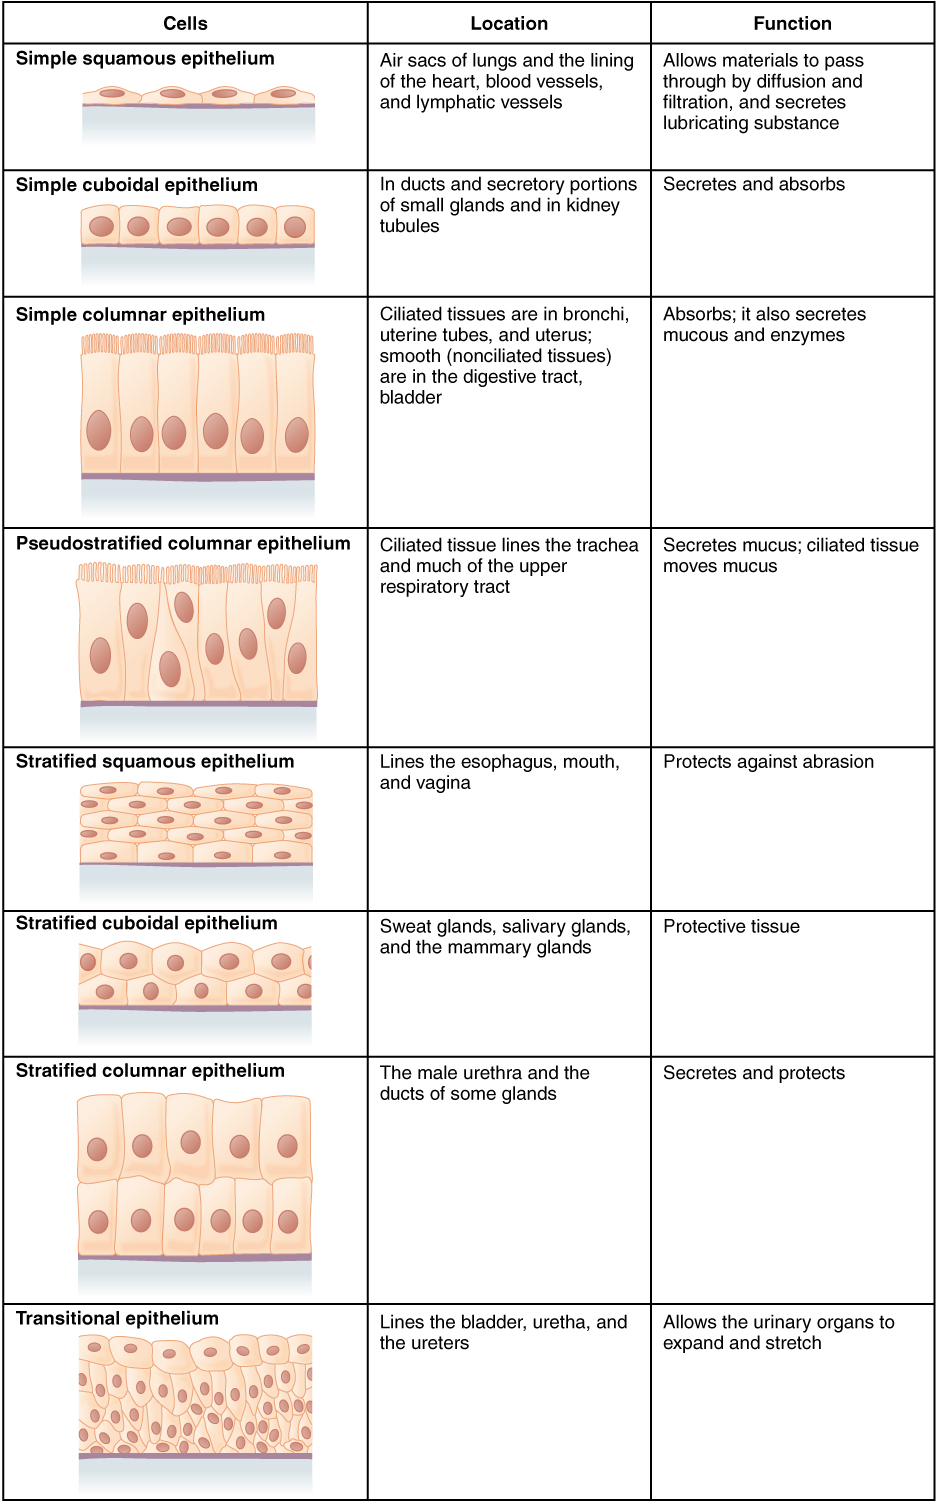 This figure is a table with three columns and eight rows. The leftmost column is titled cells, and contains a drawing in each row showing how epithelial cells are arranged above a basement membrane. The middle column is titled location, while the rightmost column is titled function. In a simple squamous epithelium, the cells are flattened and single-layered. Simple squamous cells are found in the air sacs of the lungs, in the lining of the heart, blood vessels and lymphatic vessels. Their function is to allow materials to pass through by diffusion and filtration, as well as to secrete lubricating substances. In a simple cuboidal epithelium, the cells are cube shaped and single layered and located in ducts and secretory portions of small glands as well as in the kidney tubules. The function of simple cuboidal epithelium is to secrete and absorb. In a simple columnar epithelium, the cells are rectangular and are attached to the basement membrane on one of their narrow sides, so that each cell is standing up like a column. There is only one layer of cells. Simple columnar epithelium is found in ciliated tissues including the bronchi, uterine tubes, and uterus, as well as in smooth, nonciliated tissues such as the digestive tract bladder. The function of simple columnar epithelium is to absorb substances but also to secrete mucous and enzymes. In a pseudostratified columnar epithelium, the cells are column-like in appearance, but they vary in height. The taller cells bend over the tops of the shorter cells so that the top of the epithelial tissue is continuous. There is only one layer of cells. Pseudostratified columnar epithelium lines the trachea and much of the upper respiratory tract. The function of pseudostratified columnar epithelium is to secrete mucous and also move that mucus using the hair like cilia projecting from the top of each cell. A stratified squamous epithelium contains many layers of flattened cells. Stratified squamous epithelium lines the esophagus, mouth, and vagina. The function of stratified squamous epithelium is to protect against abrasion. Stratified cuboidal epithelium contains many layers of cube-shaped cells. Stratified cuboidal epithelium is found in the sweat glands, salivary glands, and mammary glands. The function of stratified cuboidal epithelium is to protect other tissues of the body. Stratified columnar epithelium contains many layers of rectangular, column-shaped cells. Stratified columnar epithelium is located in the male urethra and the ducts of some glands. The function of stratified columnar epithelium is to secrete and protect. Transitional epithelium consists of many layers of irregularly shaped cells with diverse sizes. Transitional epithelium is found lining the bladder, urethra and ureters. The function of transitional epithelium is to allow the urinary organs to expand and stretch.